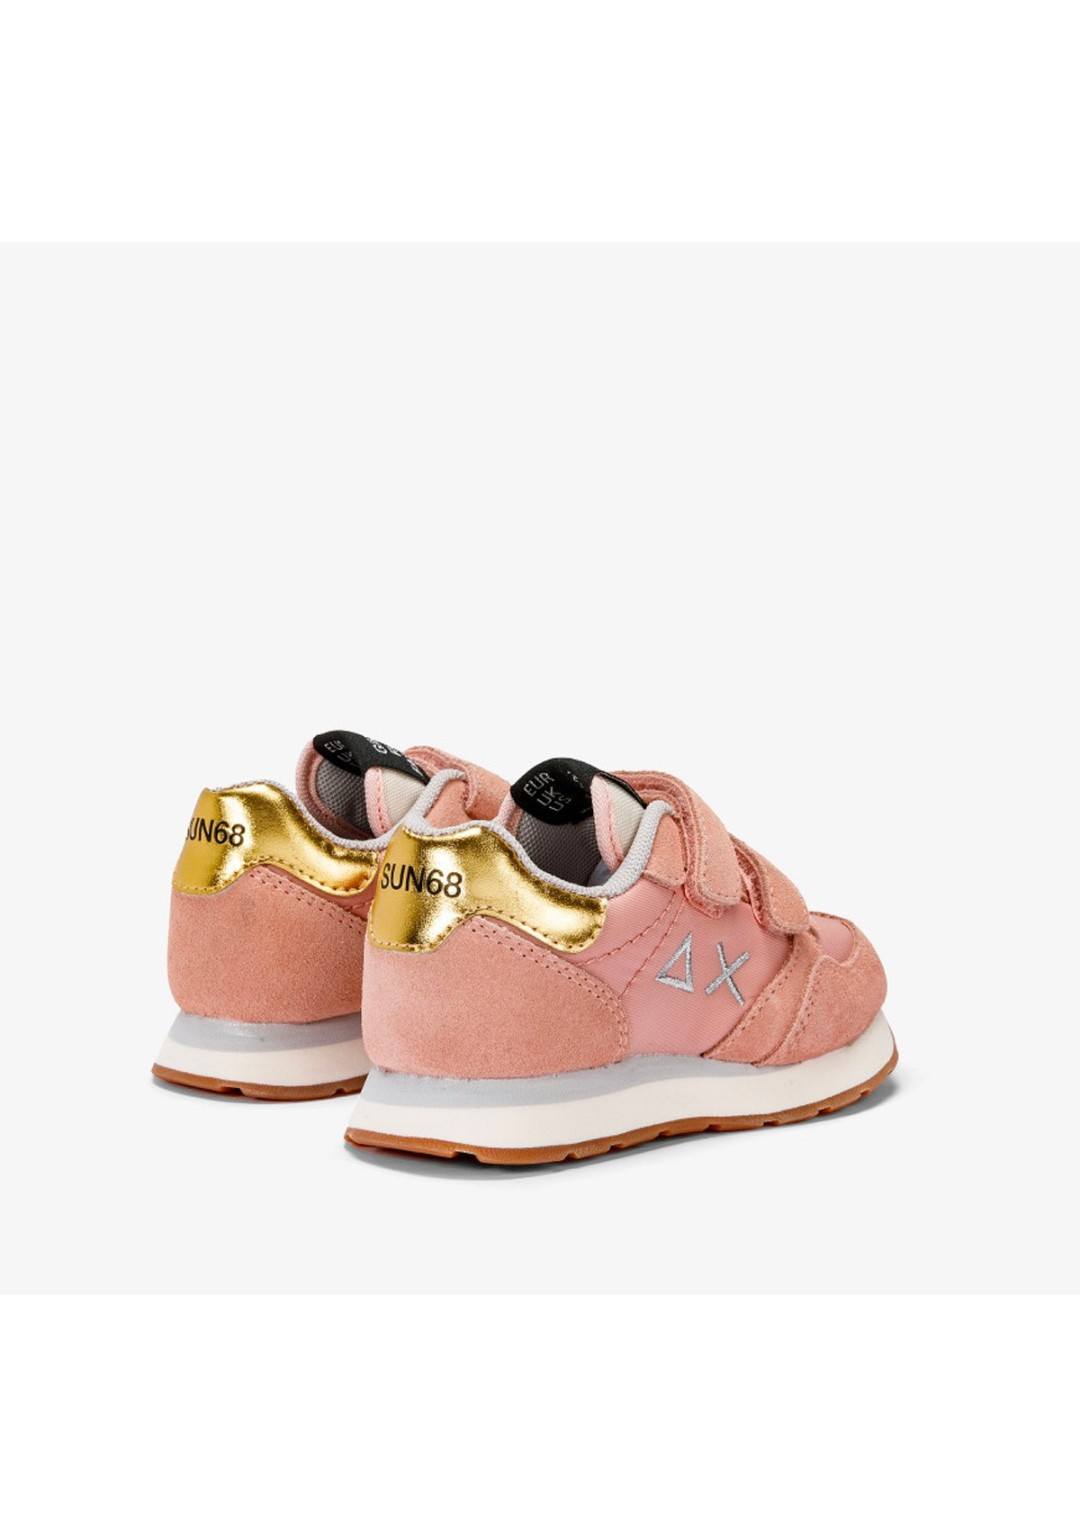 SUN68 GIRL'S ALLY GOLD Sneakers Baby